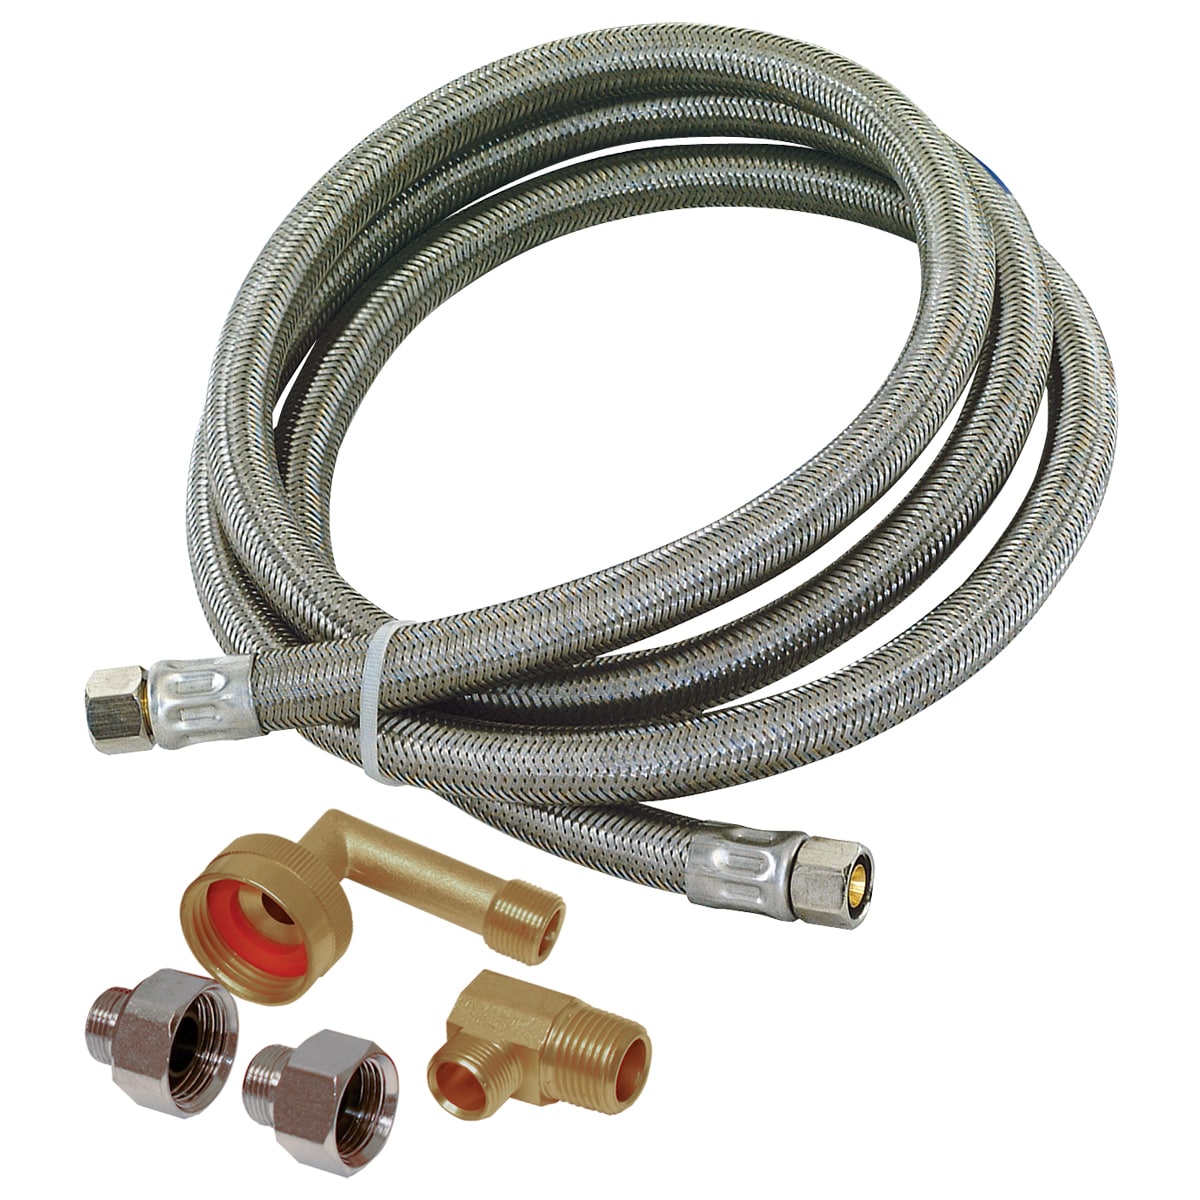 New Eastman 8-ft 1500-PSI Stainless Steel Dishwasher Connector Water Supply Kit 